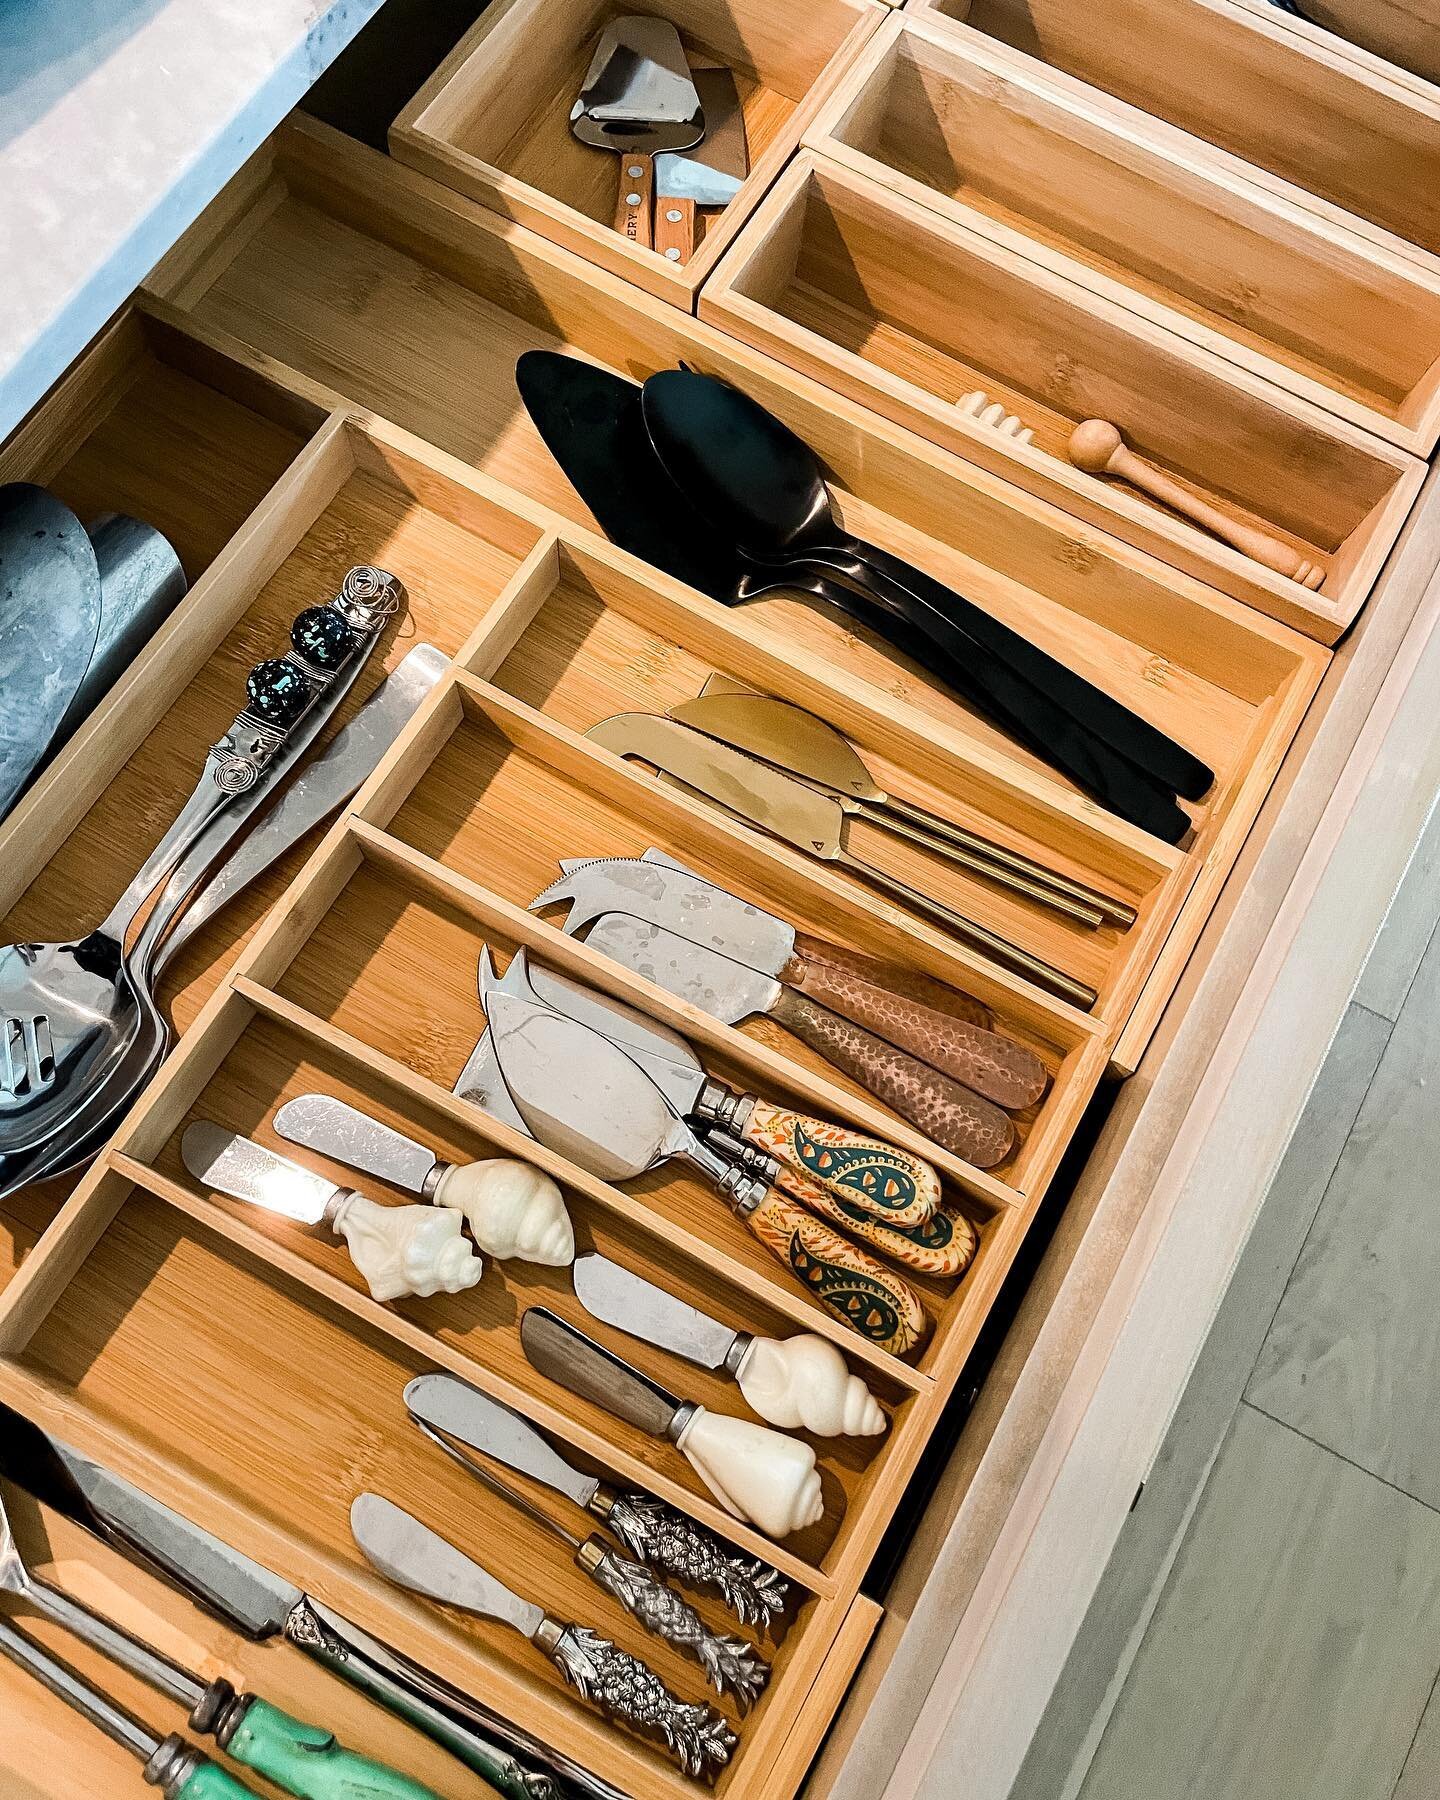 Love to entertain? Creating a drawer for serving utensils will make hosting a breeze! 🍴

#tulsaorganizer #tulsaorganizers #tulsaorganizing #kitchenorganization #kitchengoals #organizingtip #tulsasmallbusiness #tulsasmallbiz #homeorganization #homeor